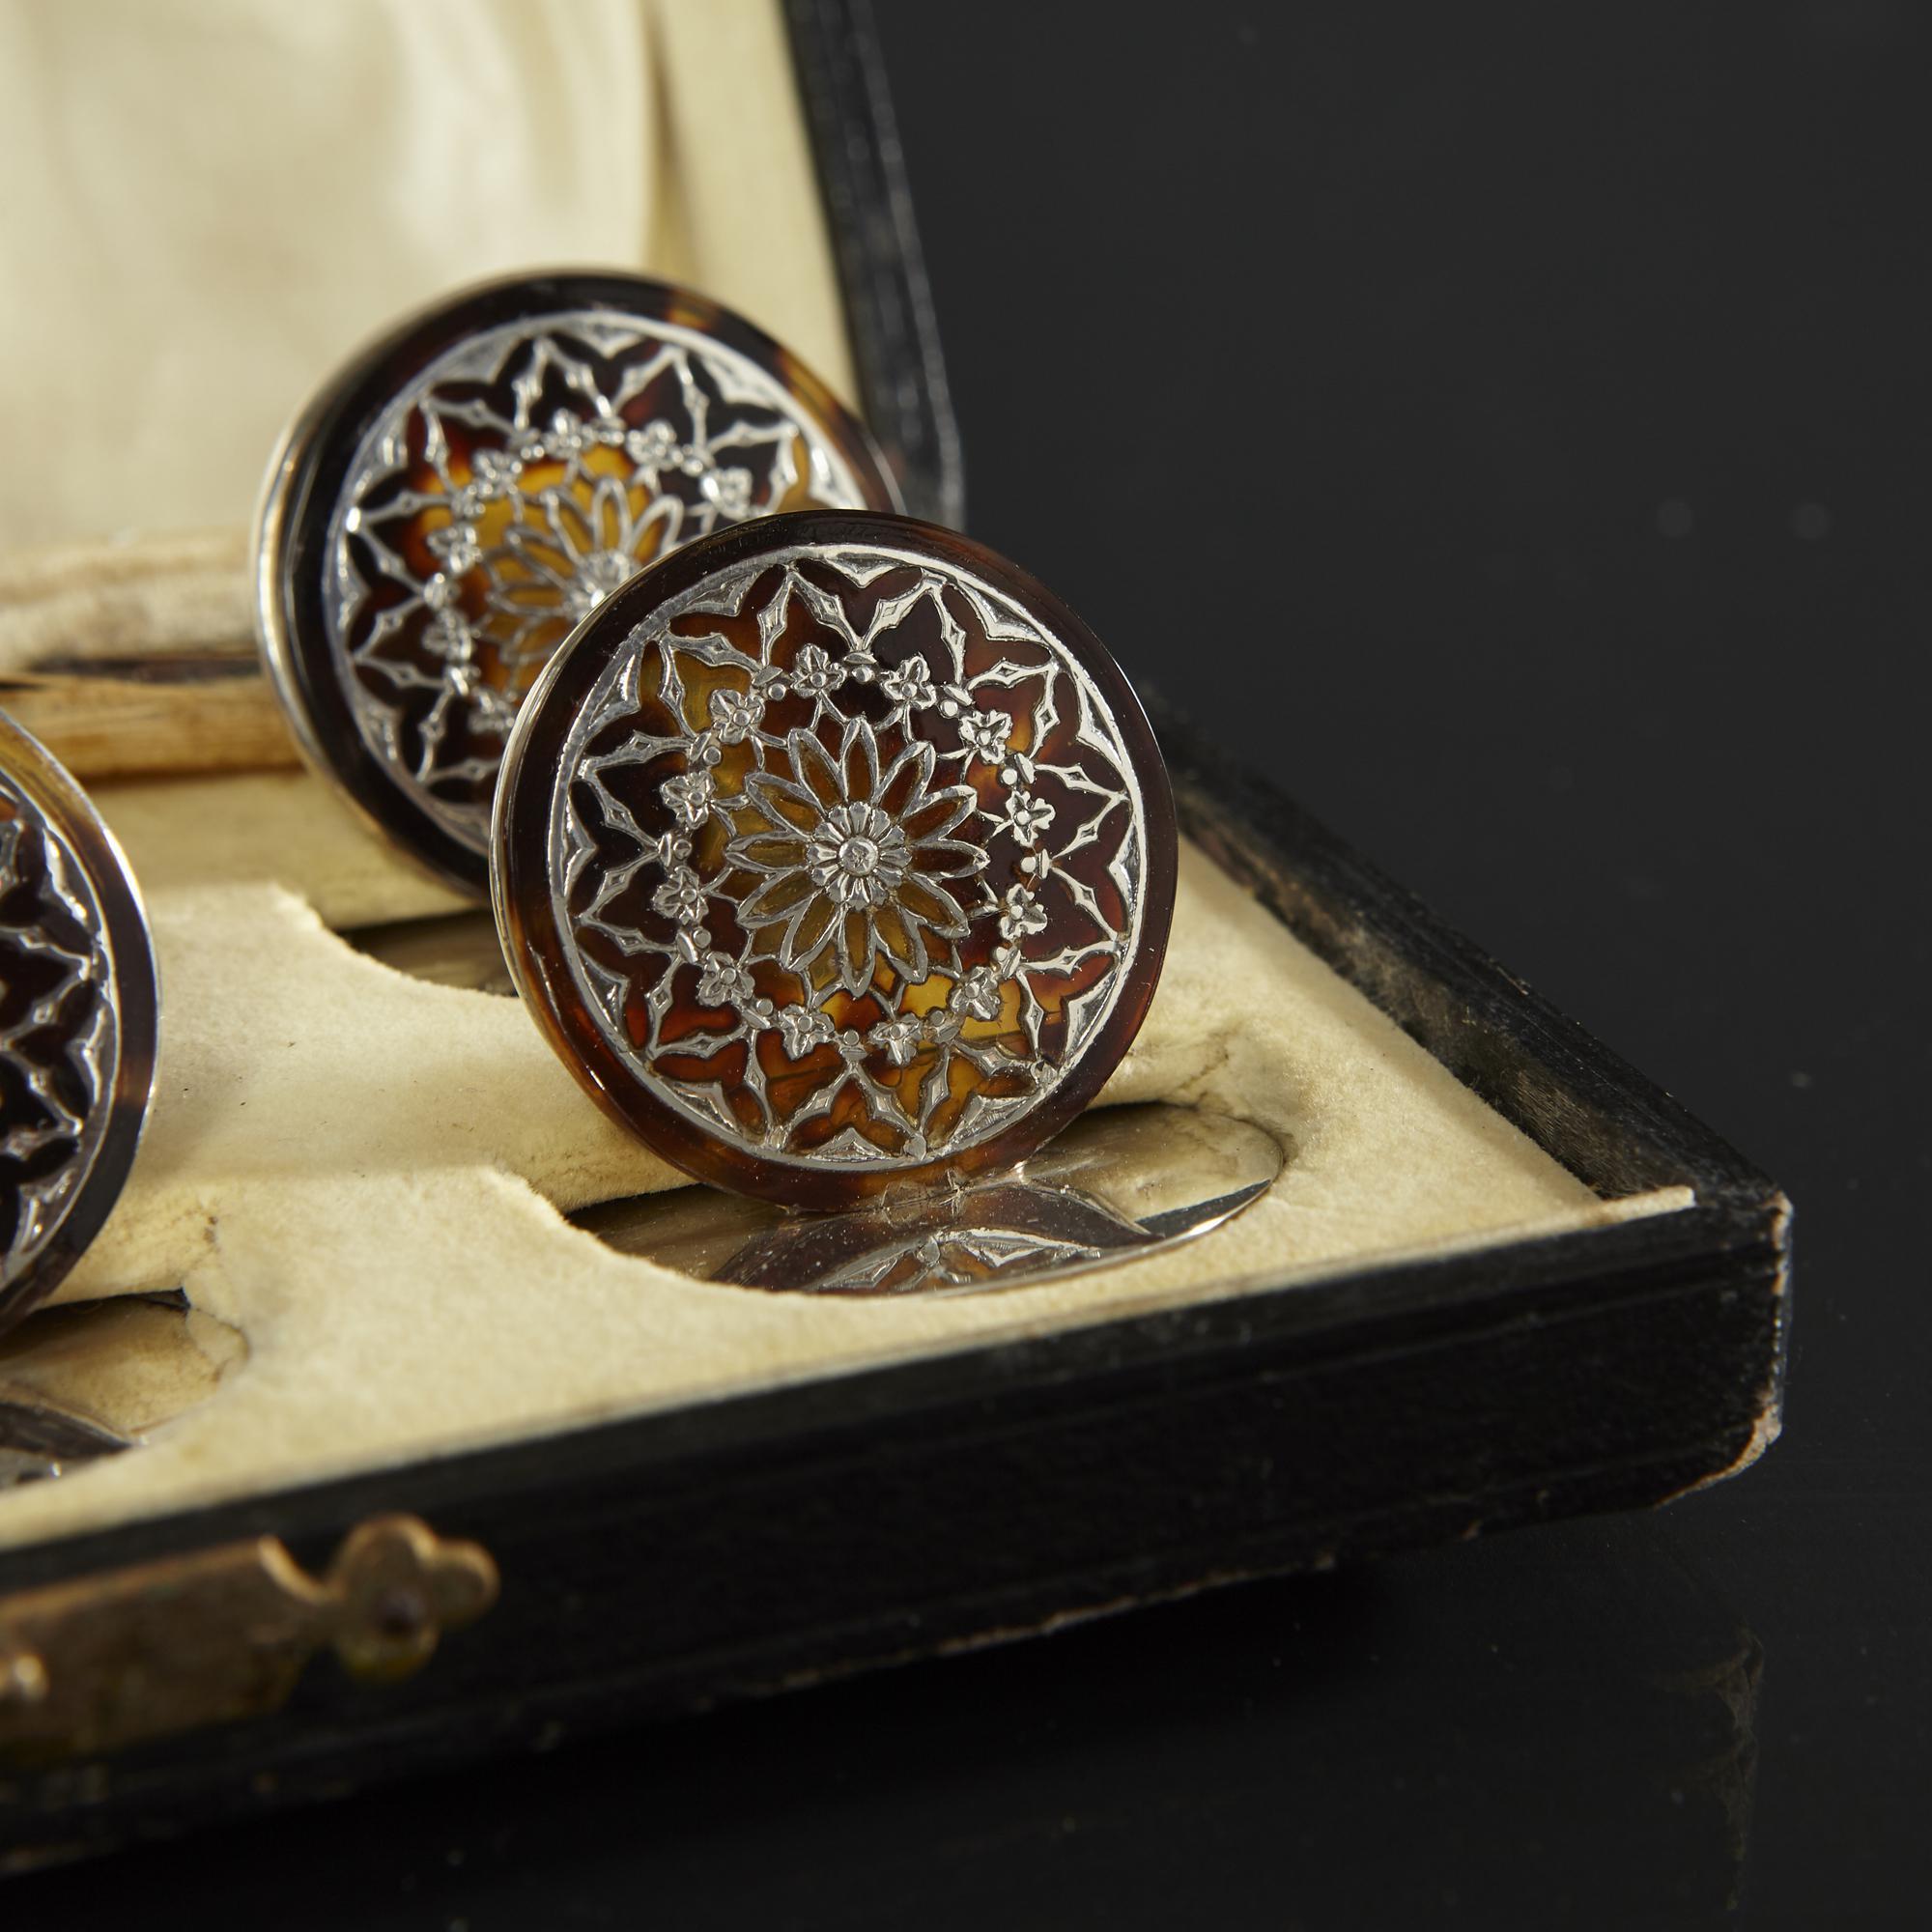 An exquisite set of 6 silver and tortoiseshell menu or place card holders decorated in the Arabesque style. Each card holder is a circular disc with the finest and most intricate inlay of silver set into the tortoiseshell. They are in superb